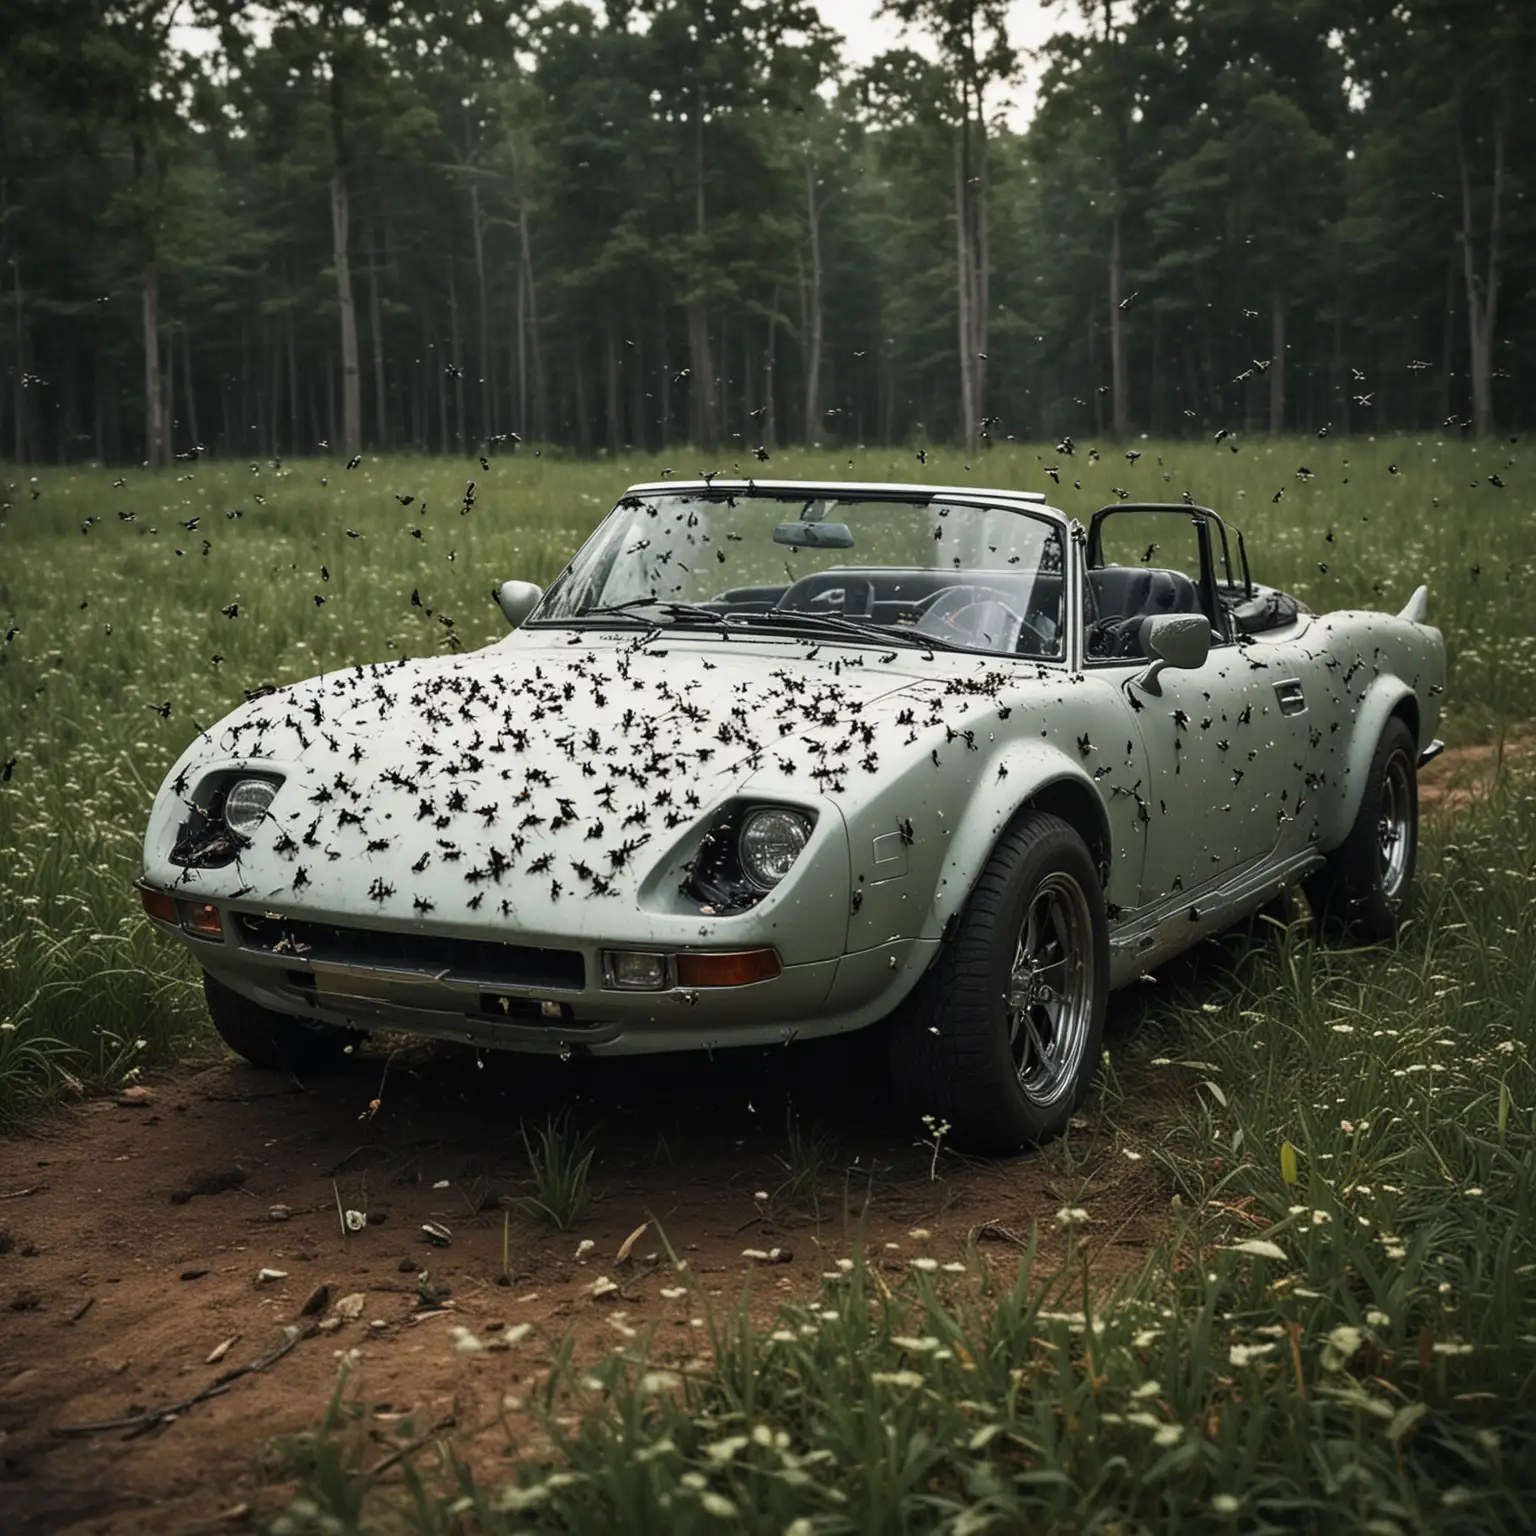 Luxury Sports Car Covered in Mosquito Swarm